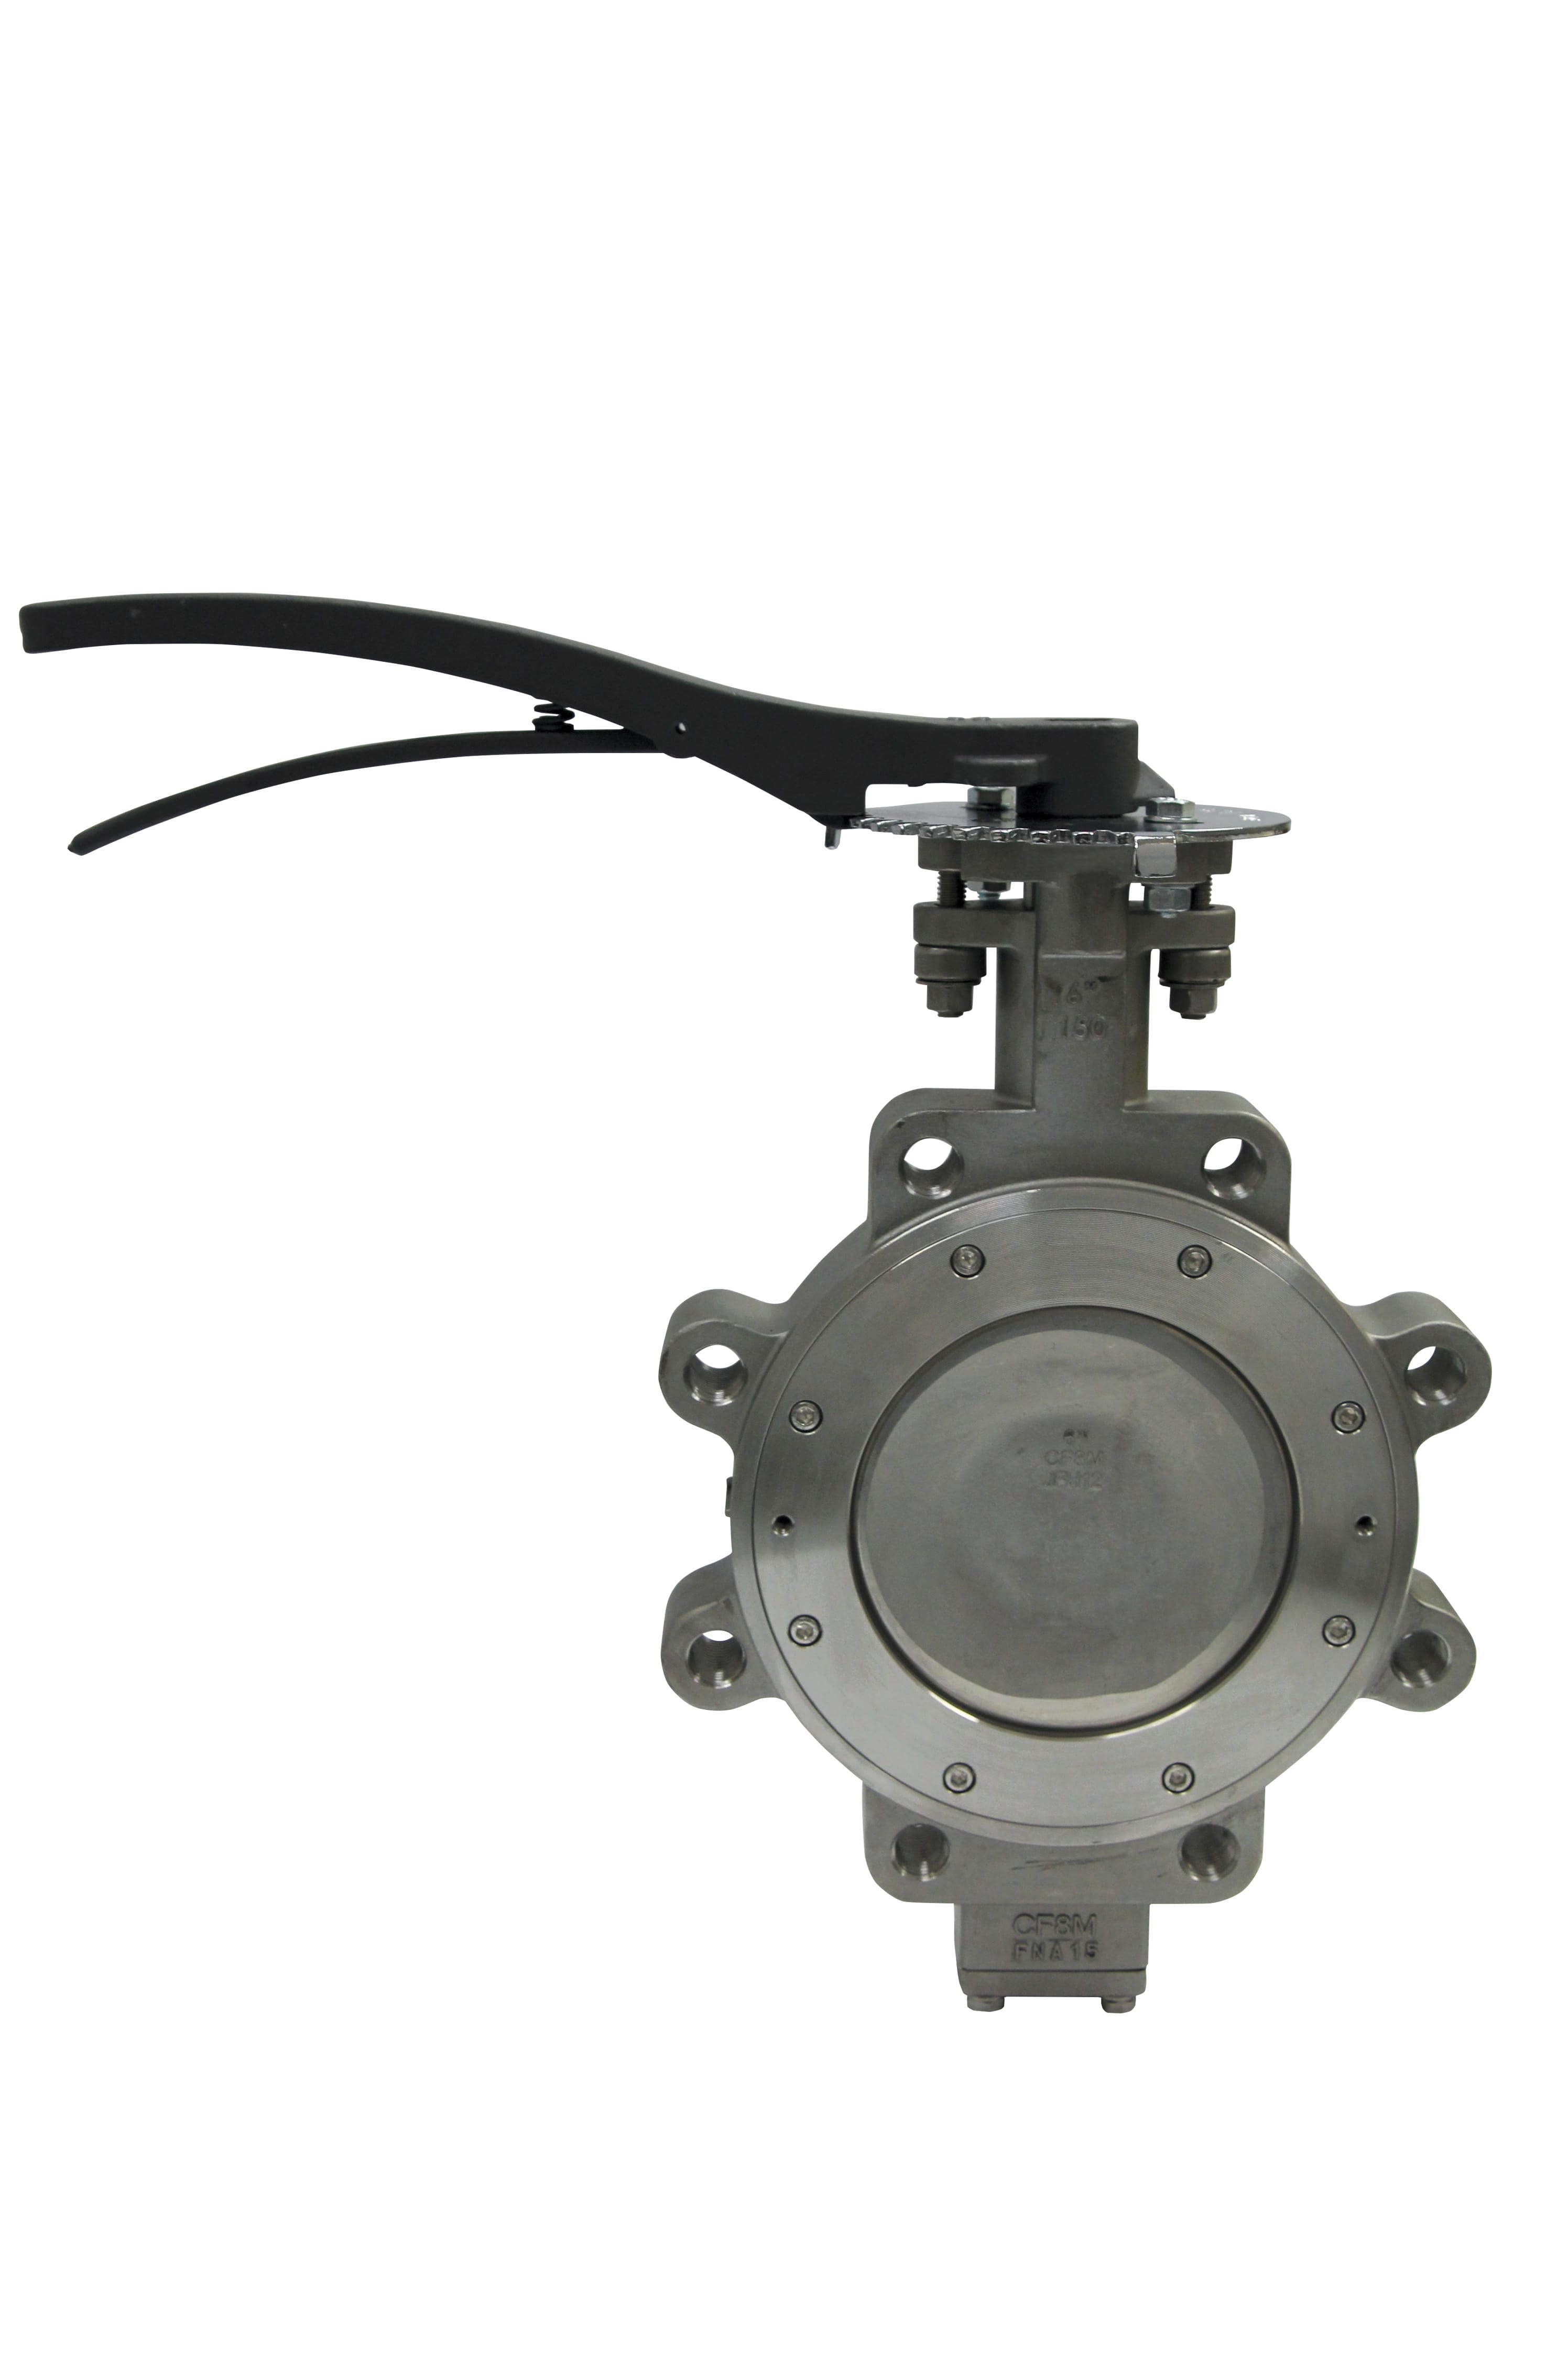 Preview image for Apollo Class 300 Stainless Steel Butterfly Valve with Stainless Steel Disc, 17-4 PH SS Stem & Pin, RTFM Seats, Standard Service, Lever Operator (2 x Lug Type)